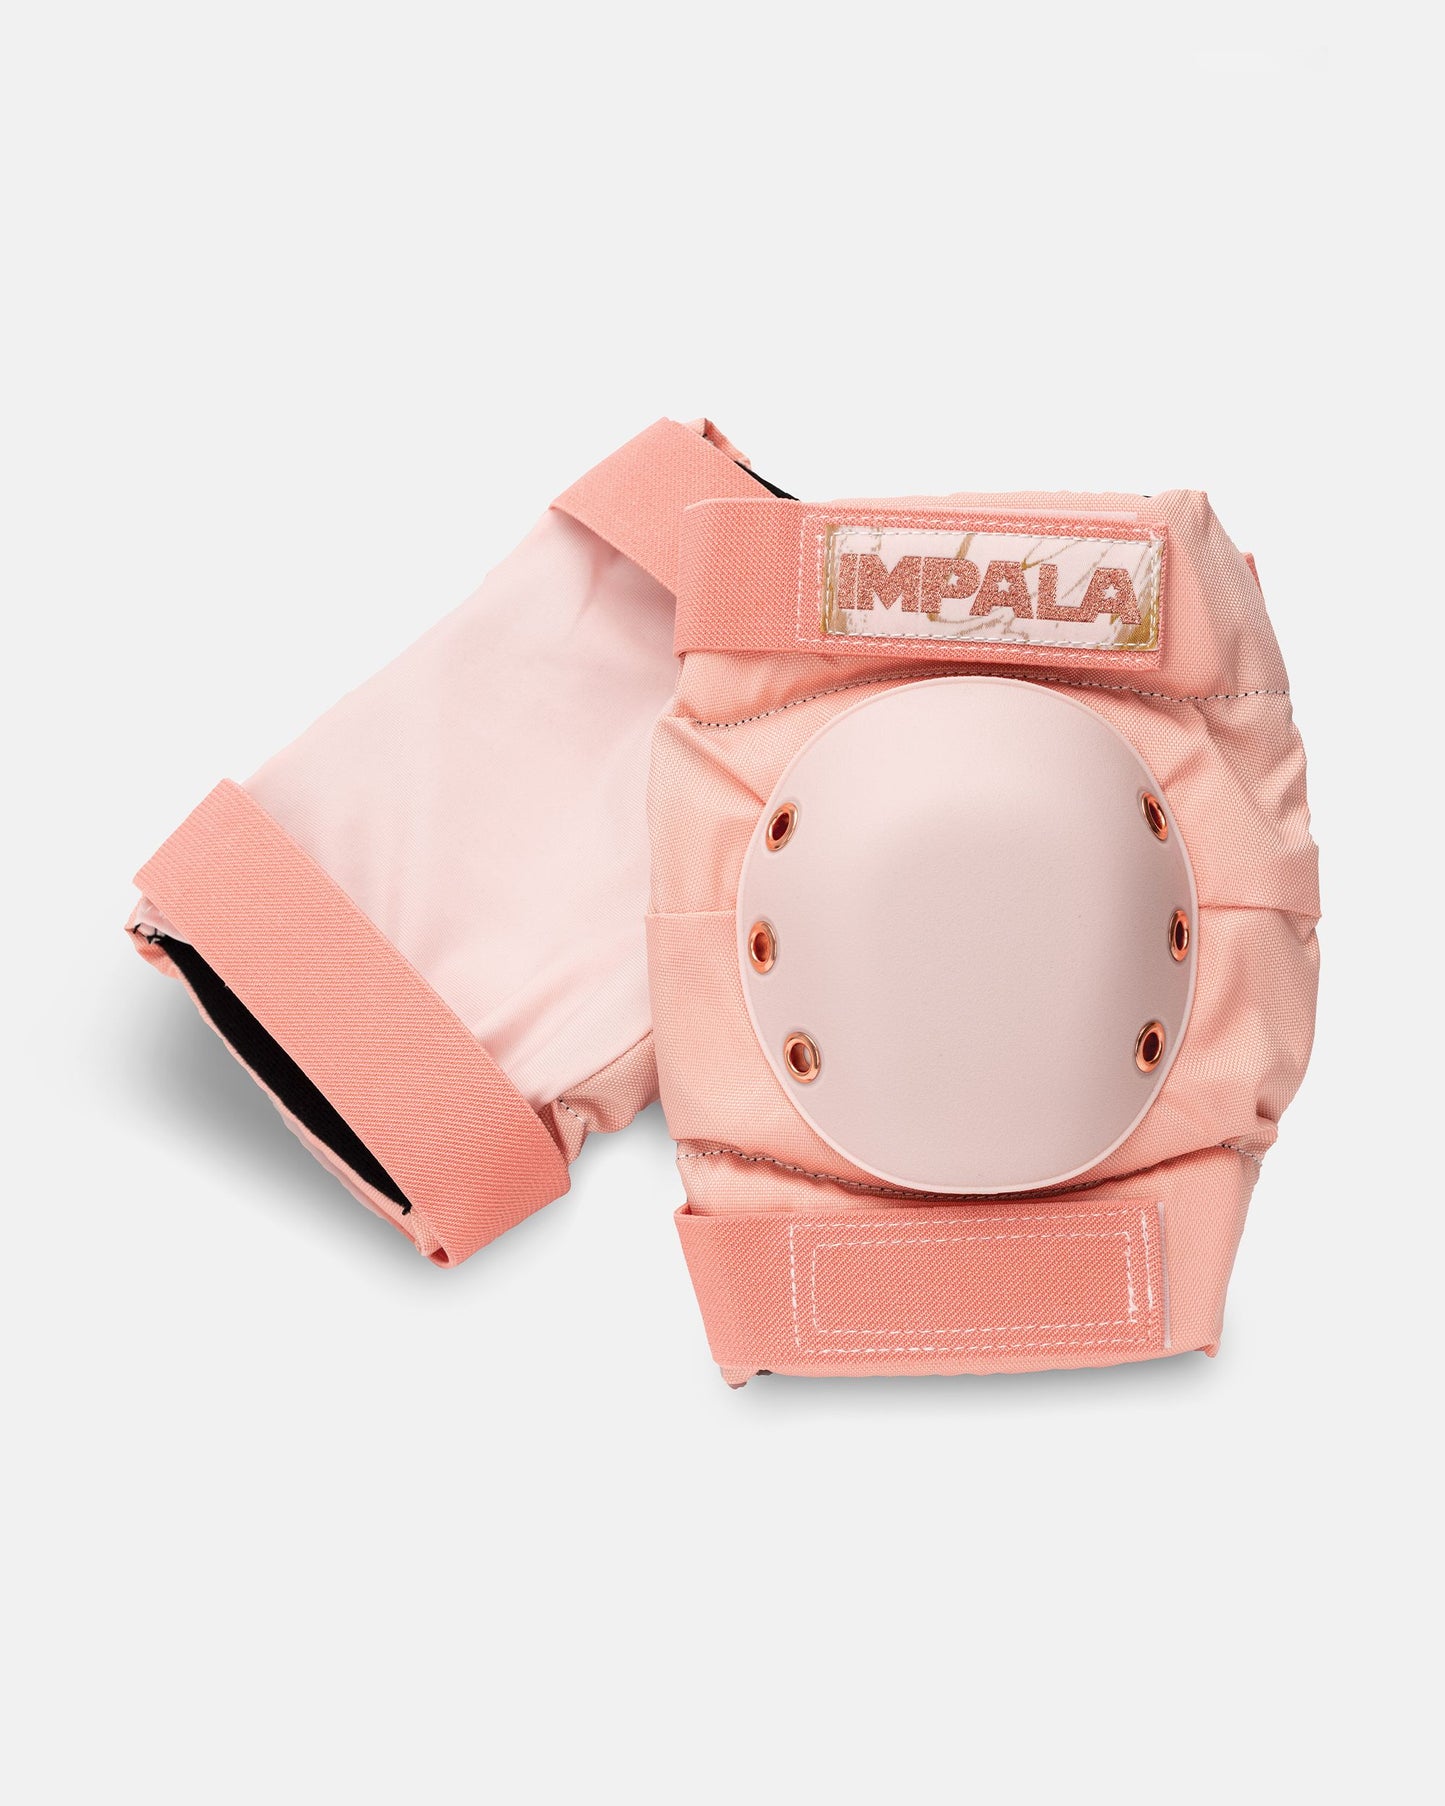 Knee pads in the Impala Protective Set - Marawa Rose Gold